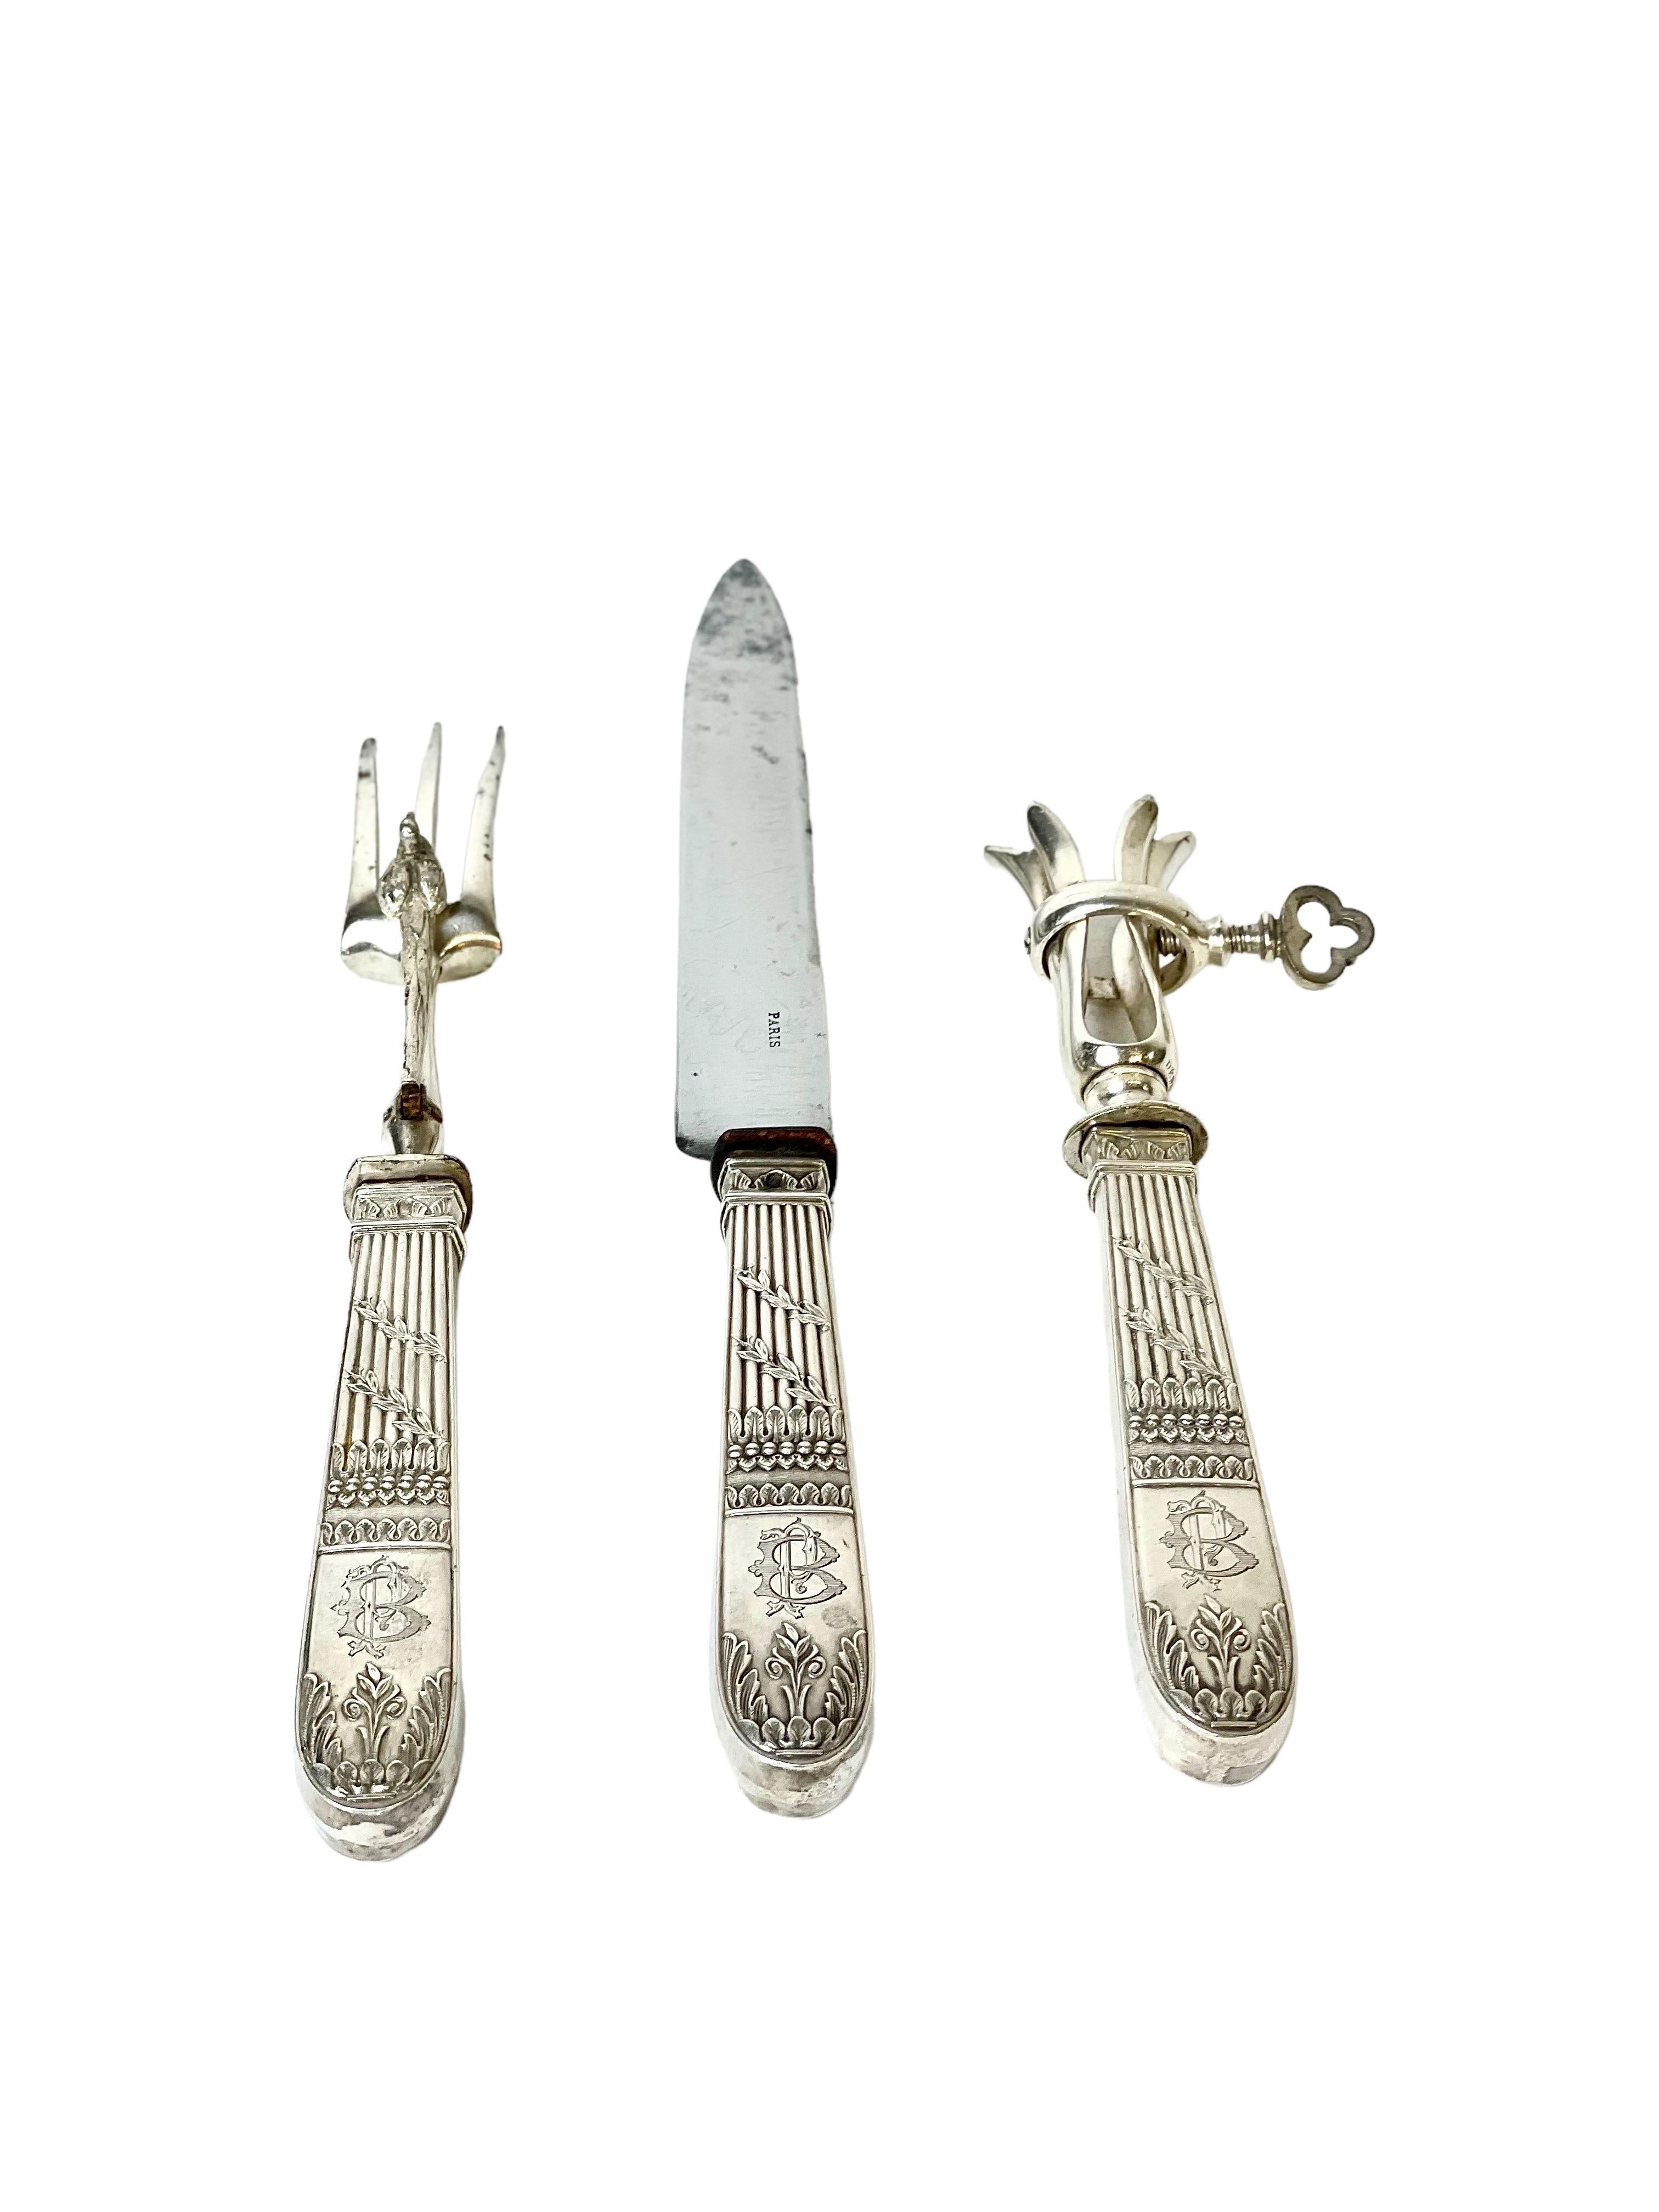 A very charming vintage French lamb carving set with silver-plated handles, comprising a carving knife, carving fork and leg-bone holder. Each implement features a beautifully fluted handle, entwined with a spray of olive leaves, and emblazoned with